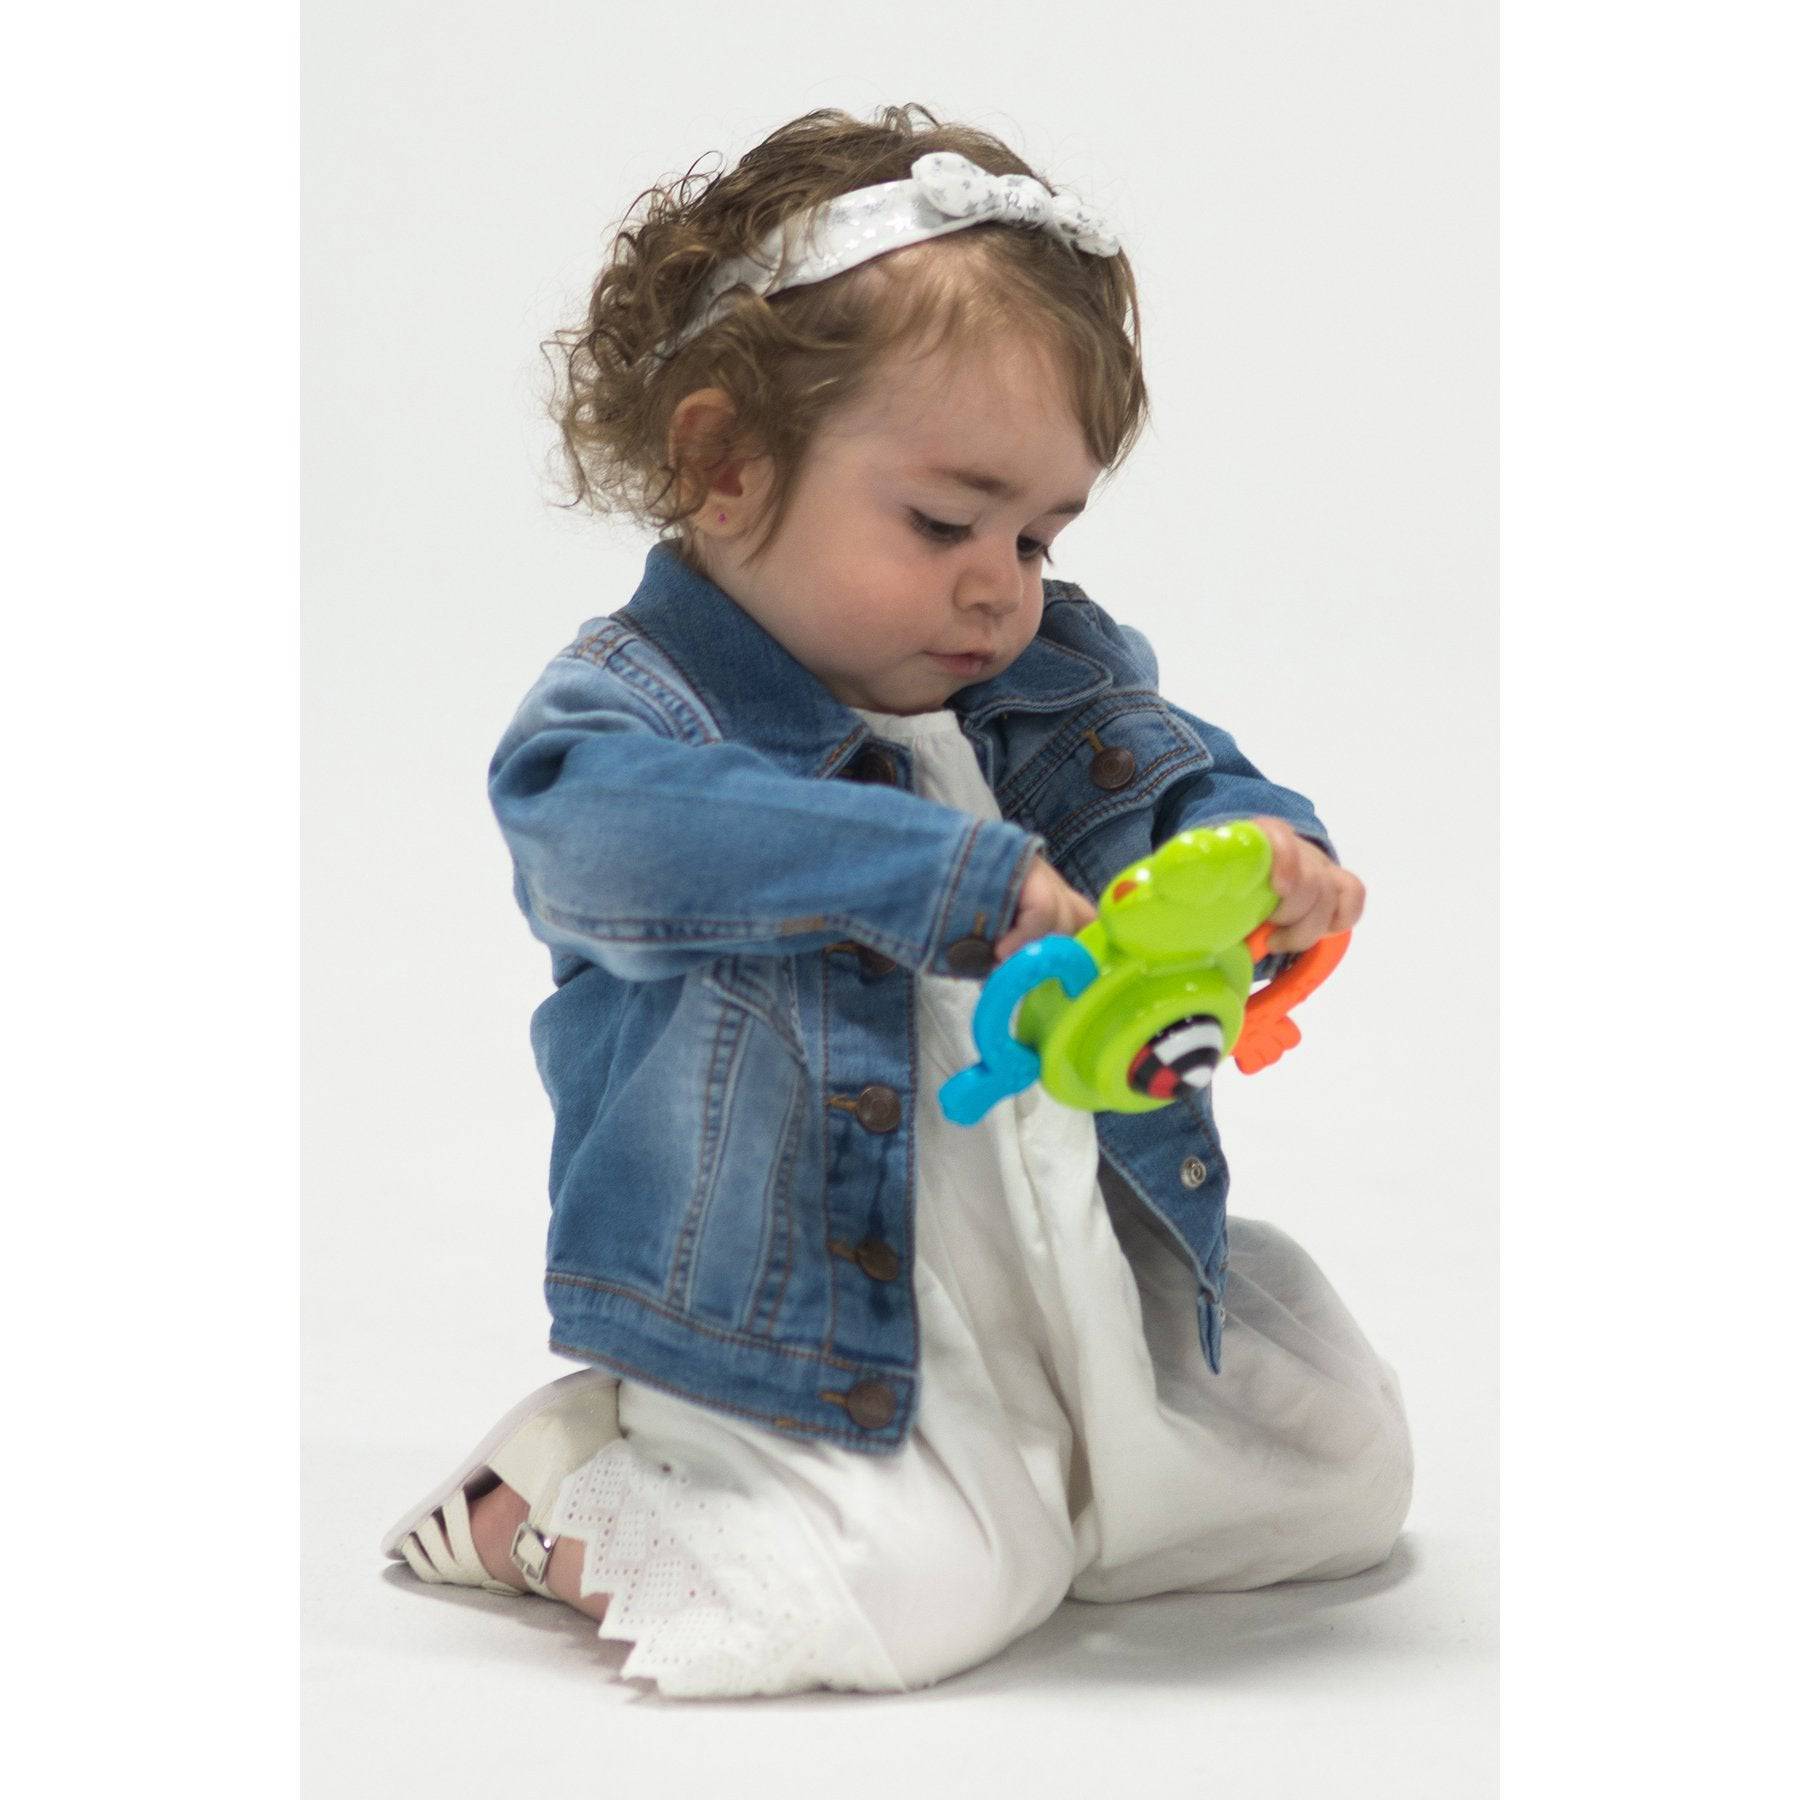 GROOVY FROG Newborn Infant Sensory Toy - Discovery Toys